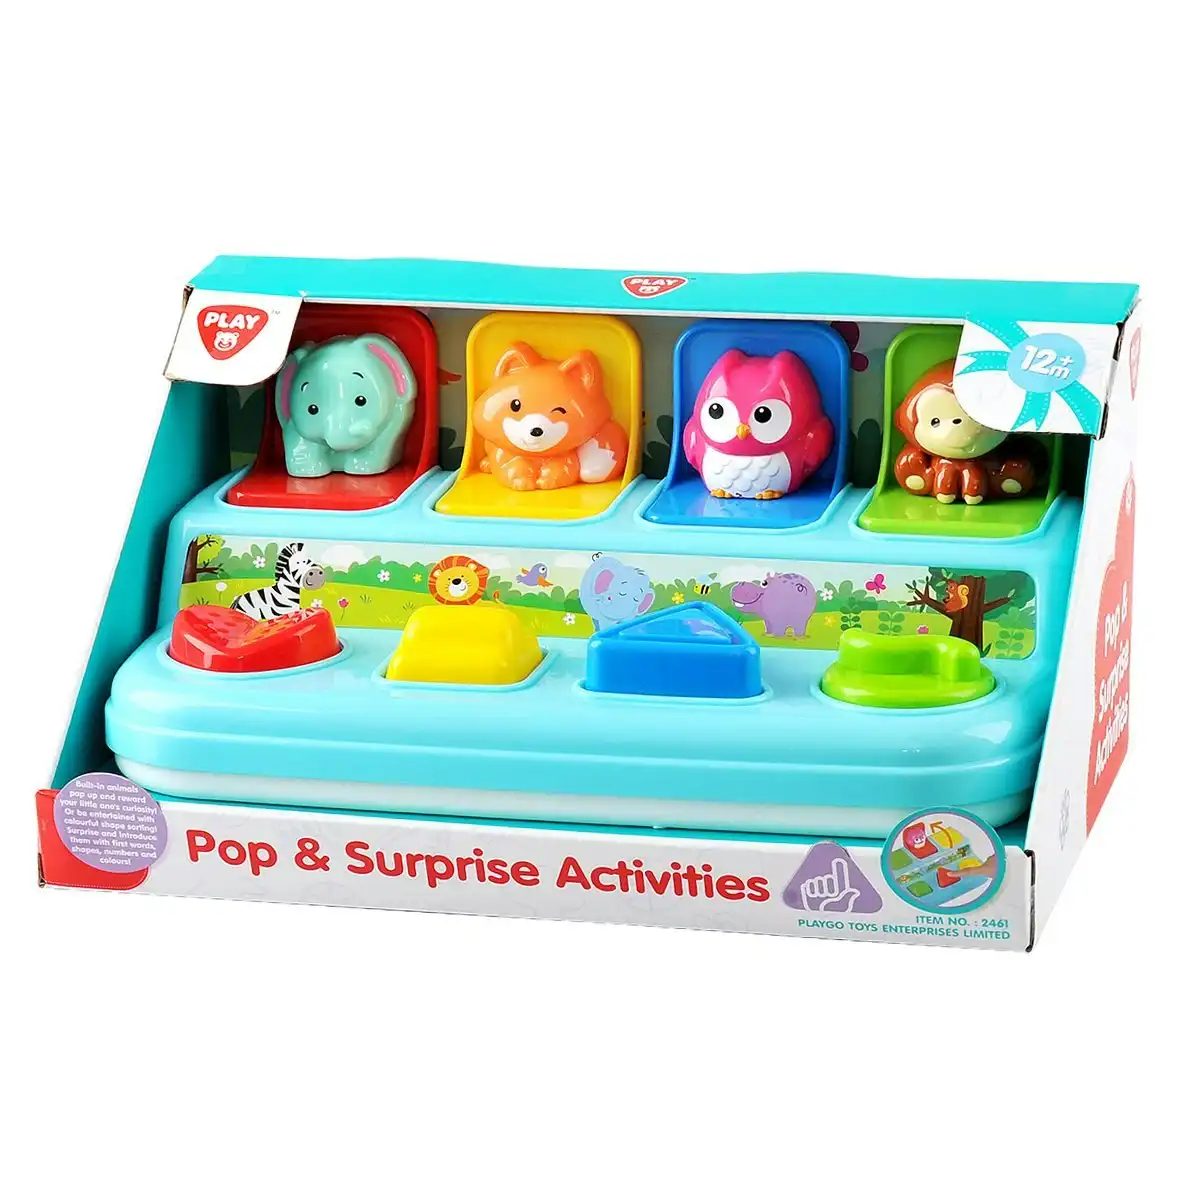 Playgo Toys Ent. Ltd. - Pop And Surprise Activities